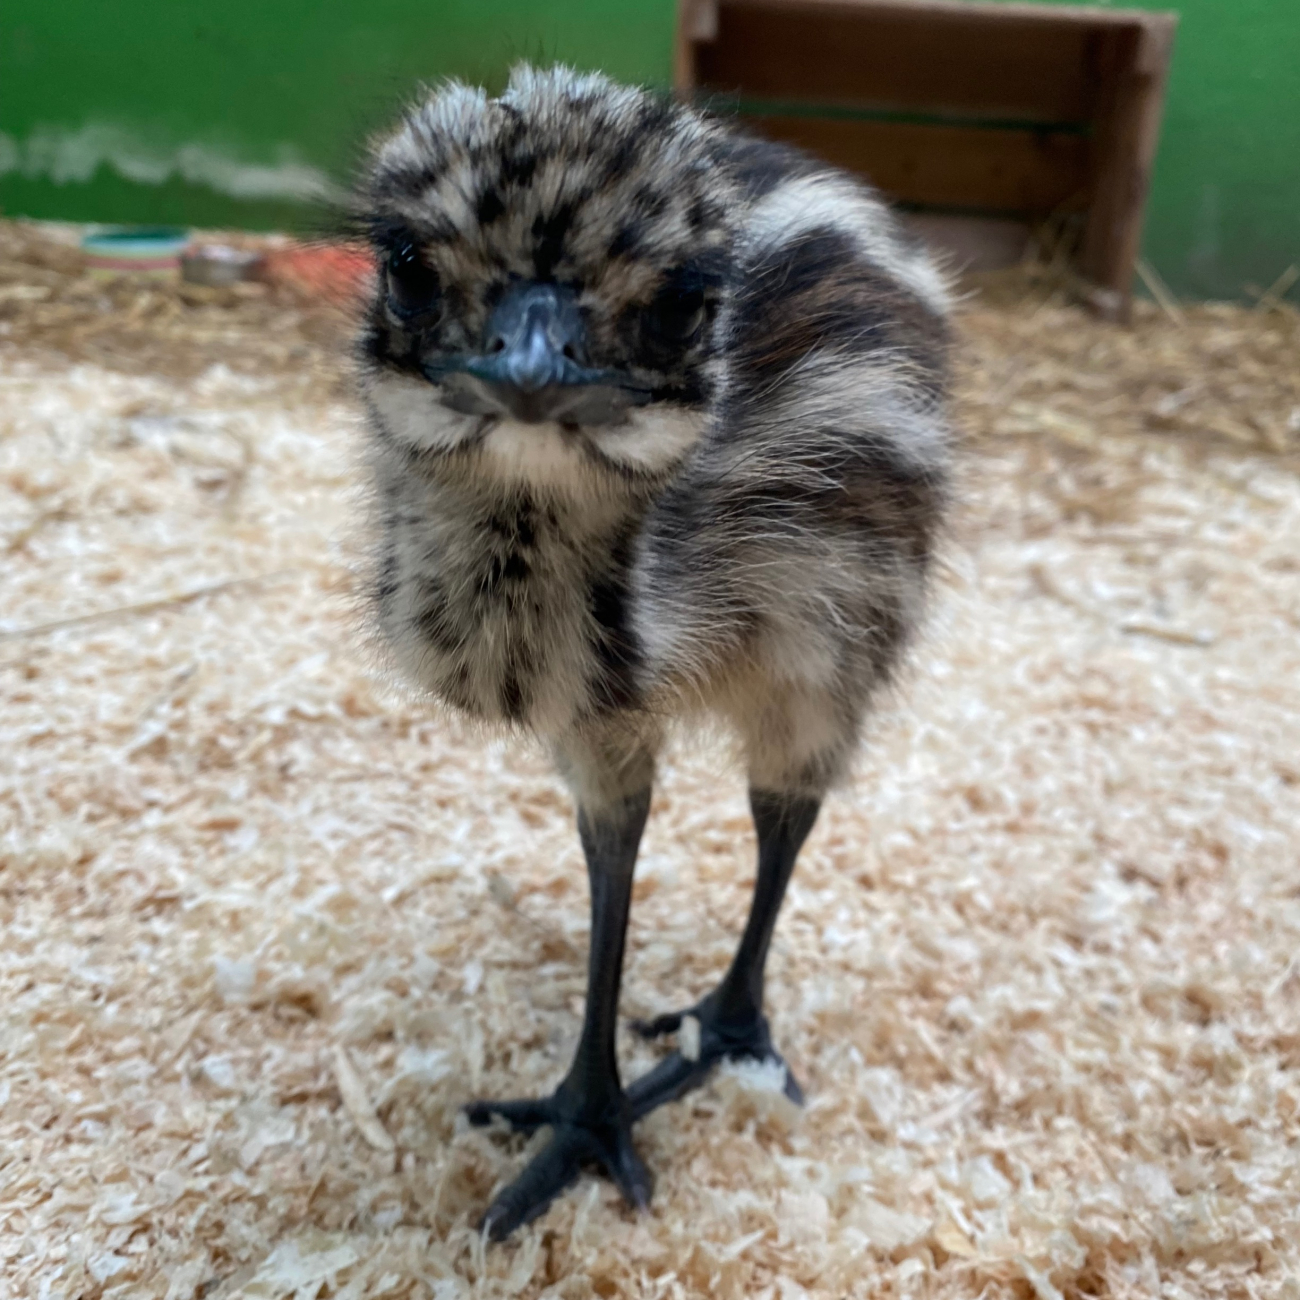 baby emu chick stood on sawdust looking into camera